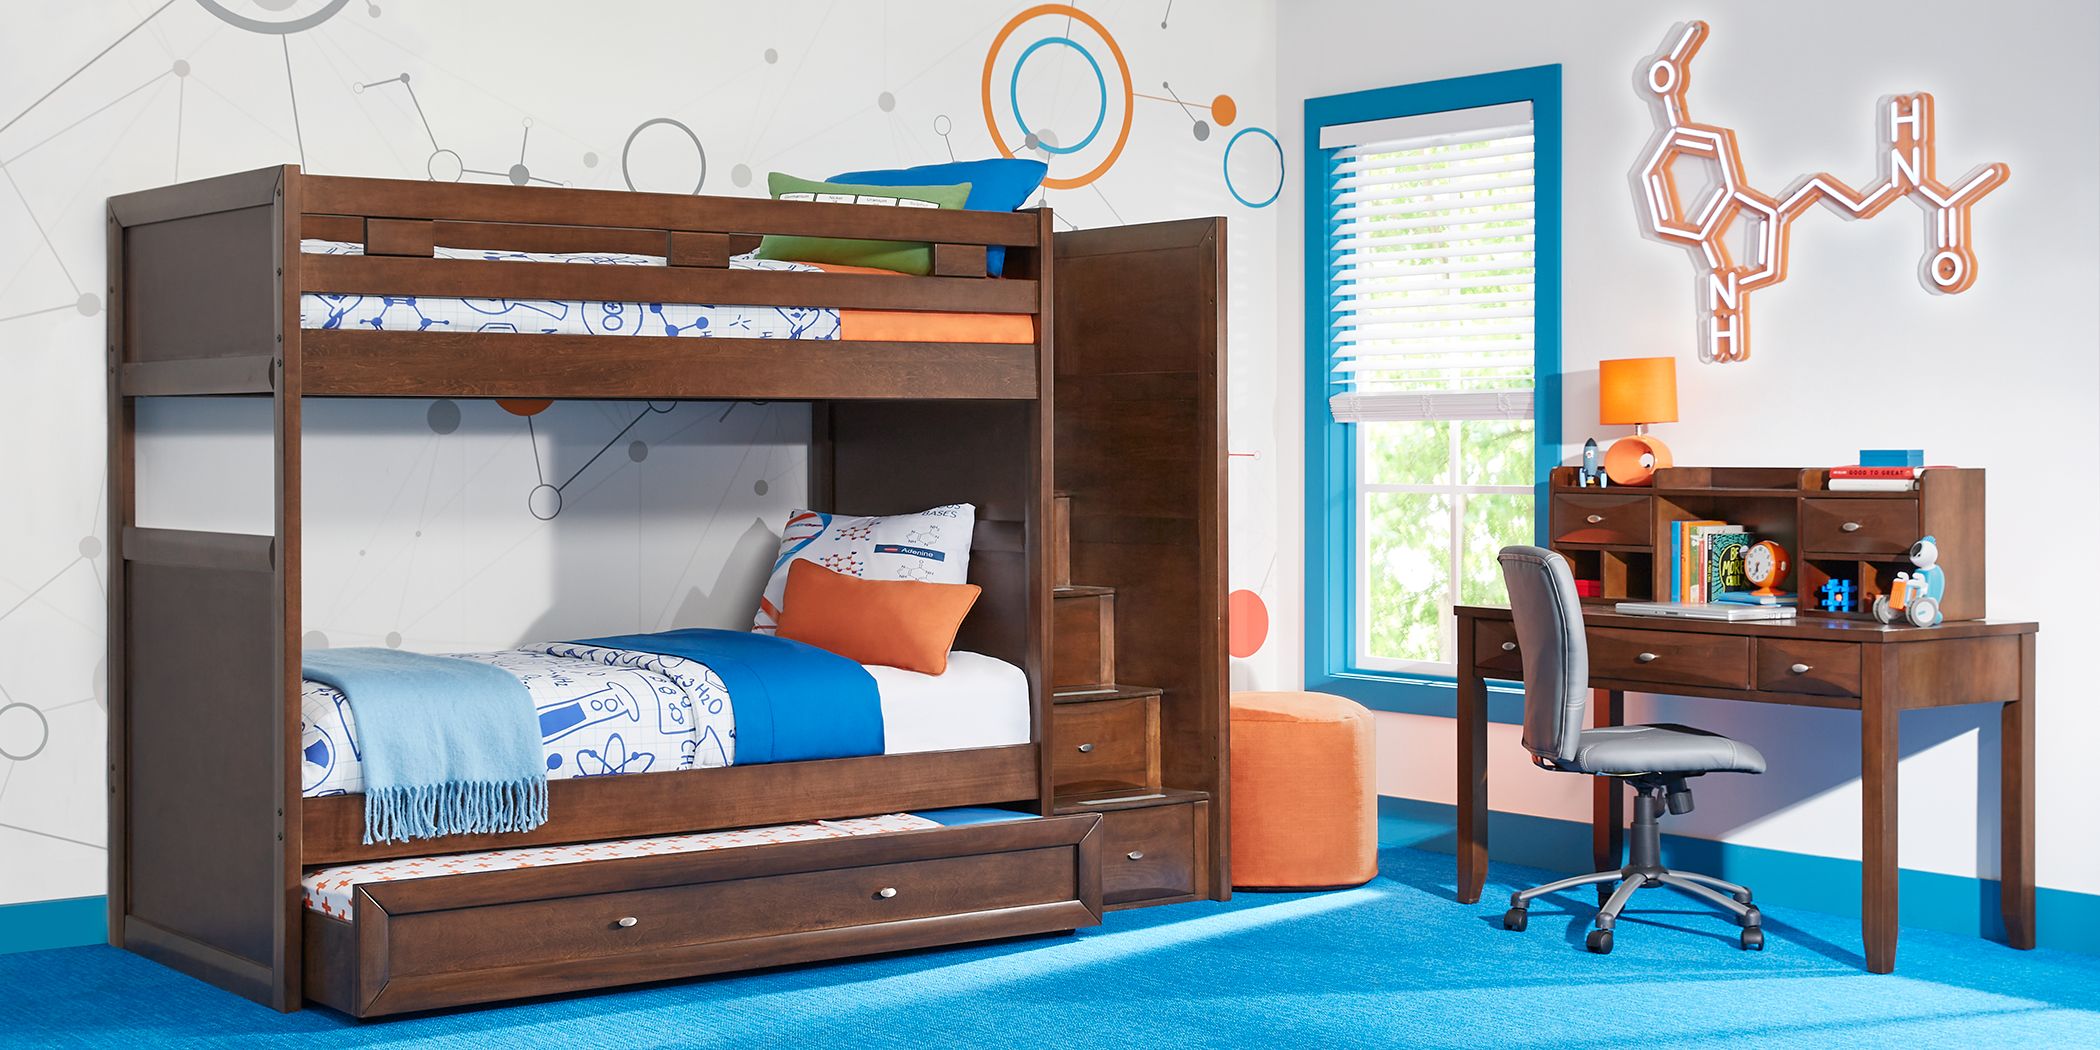 2 0 Walnut Twin Step Bunk Bed, Rooms To Go Ivy League Bunk Bed